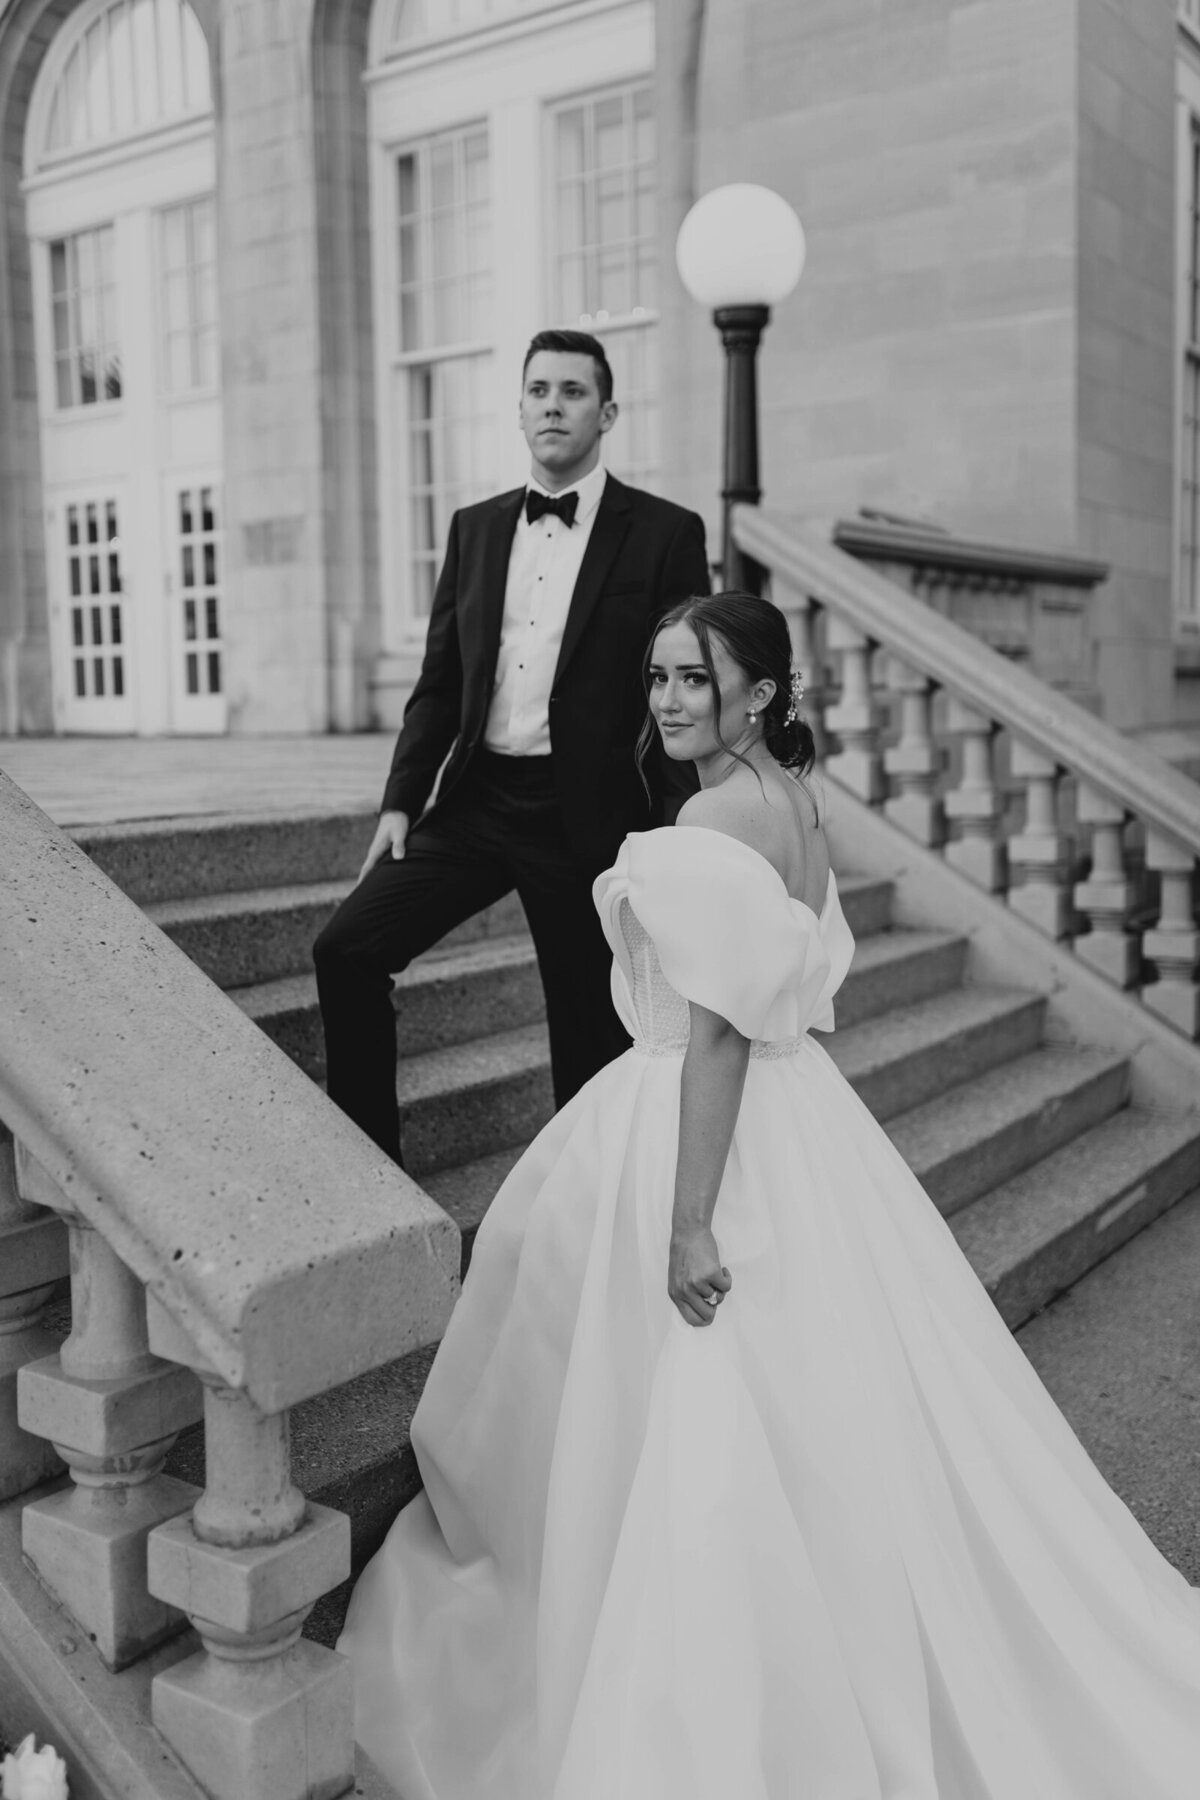 Black and white portrait of bride and groom.